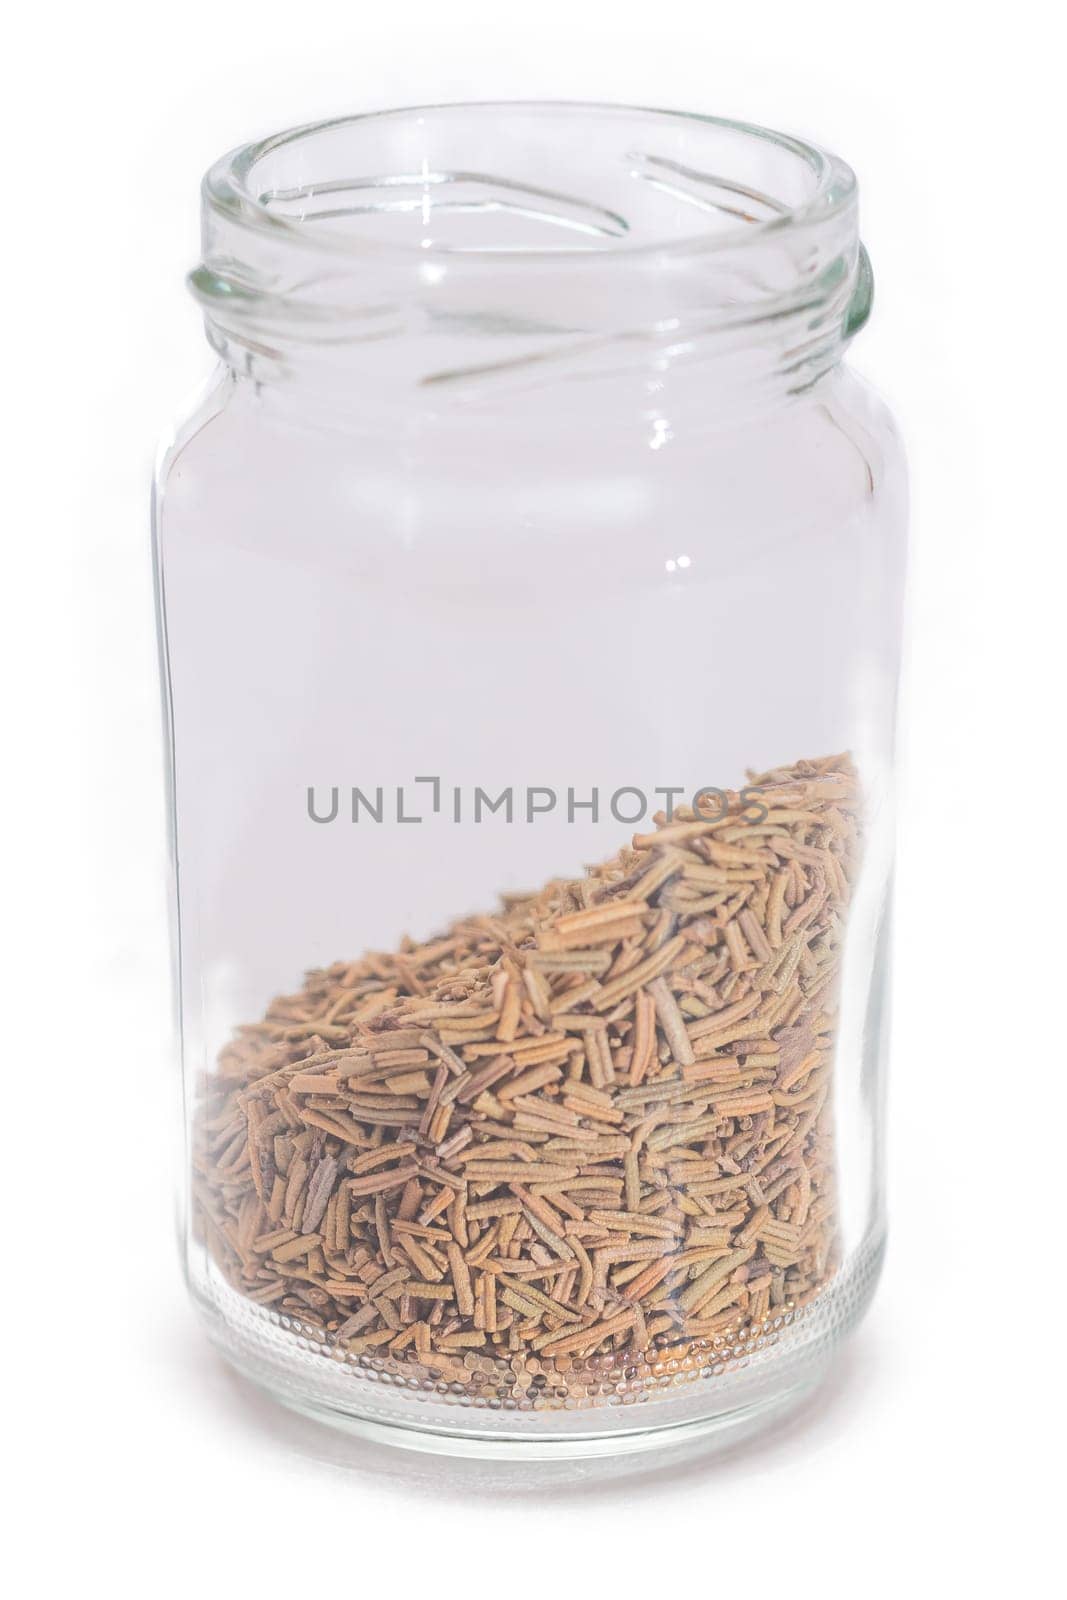 Rosemary Seasoning in a Small Glass Jar Isolated by InfinitumProdux